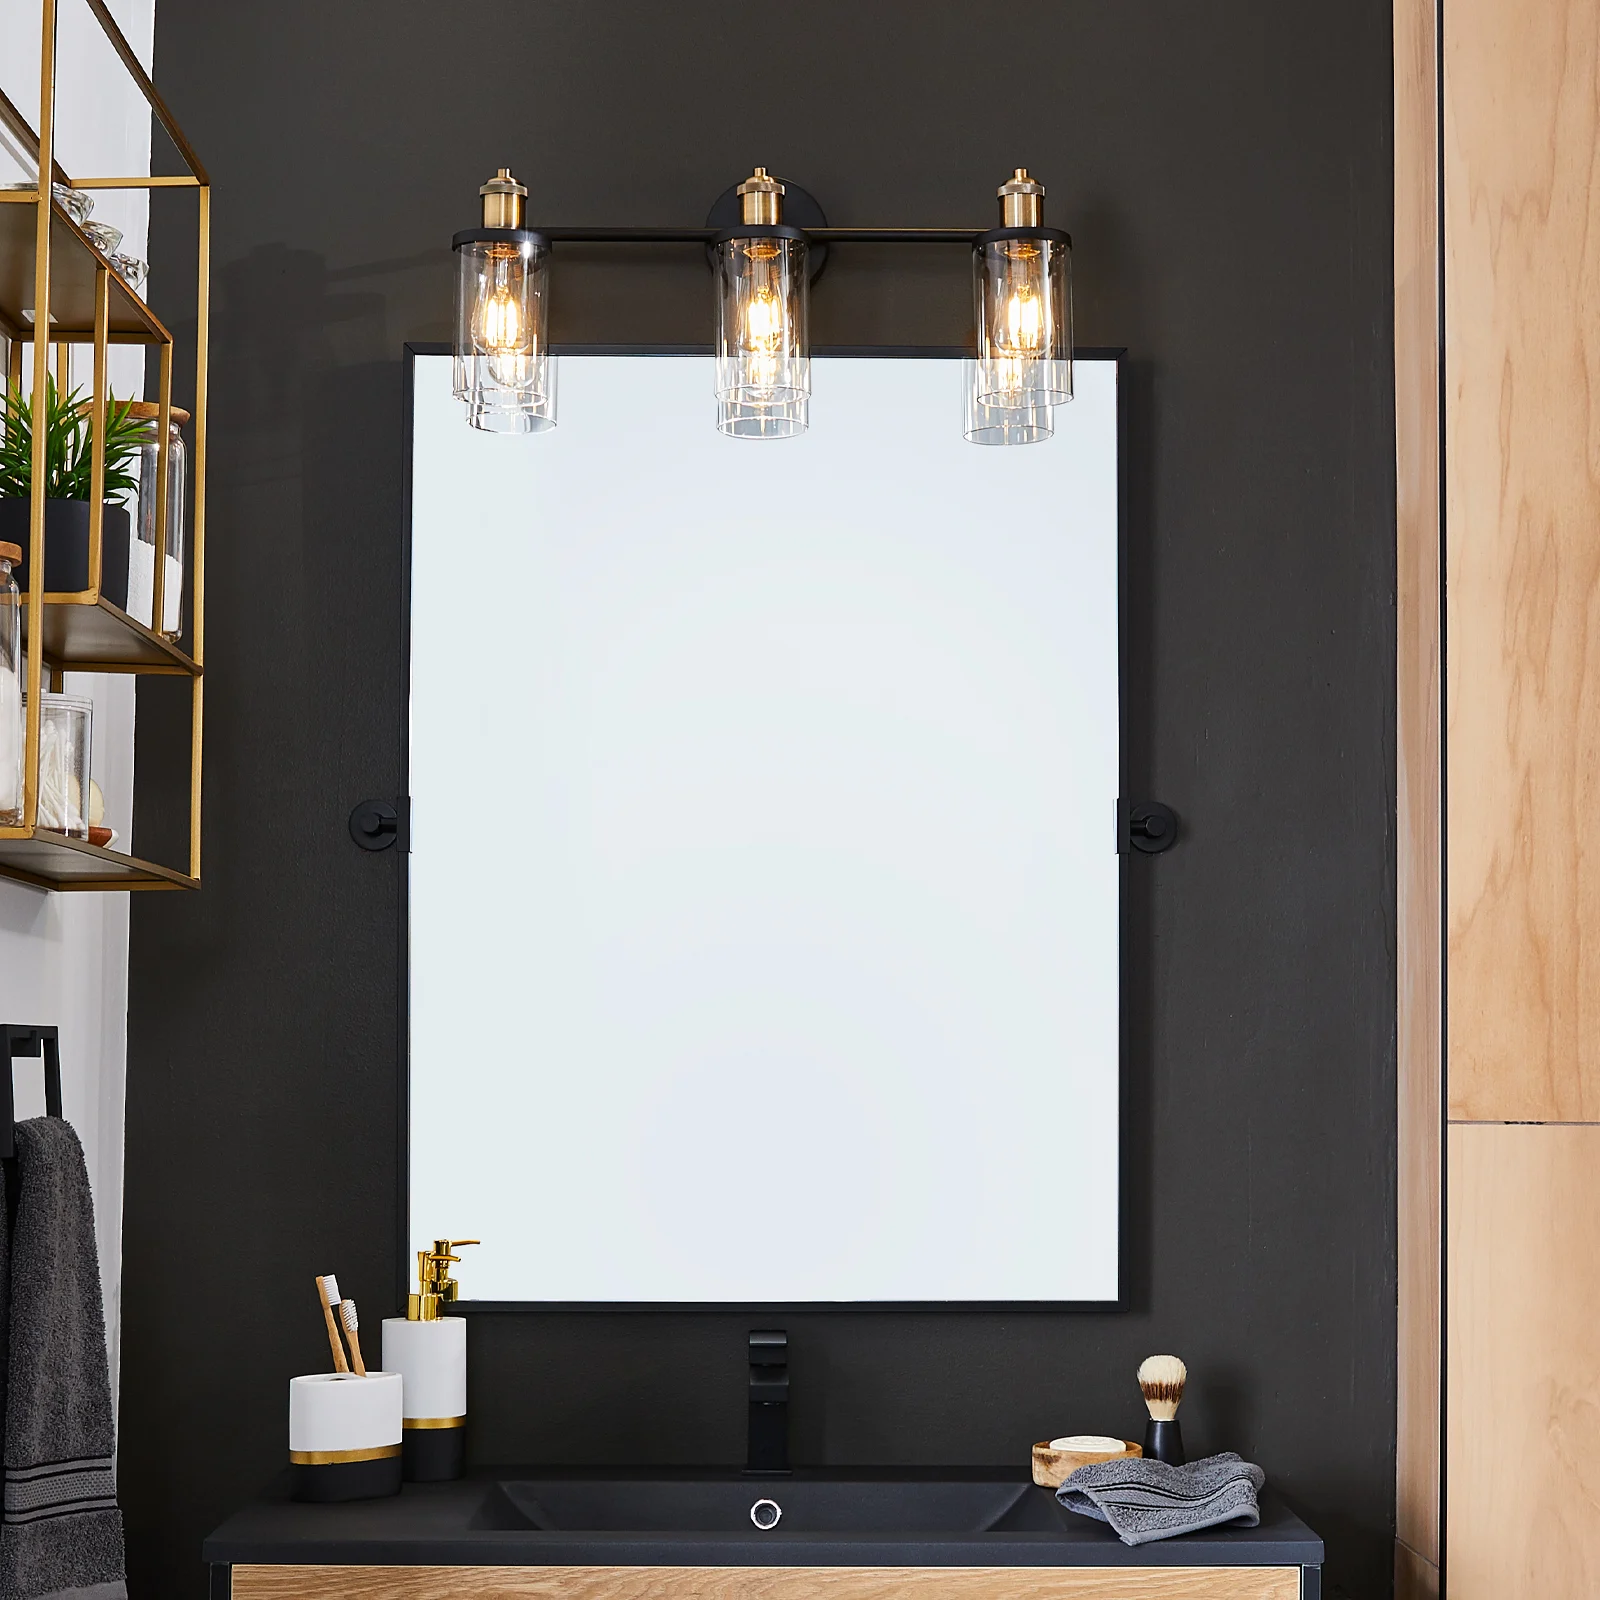 A mirror with vanity lights 